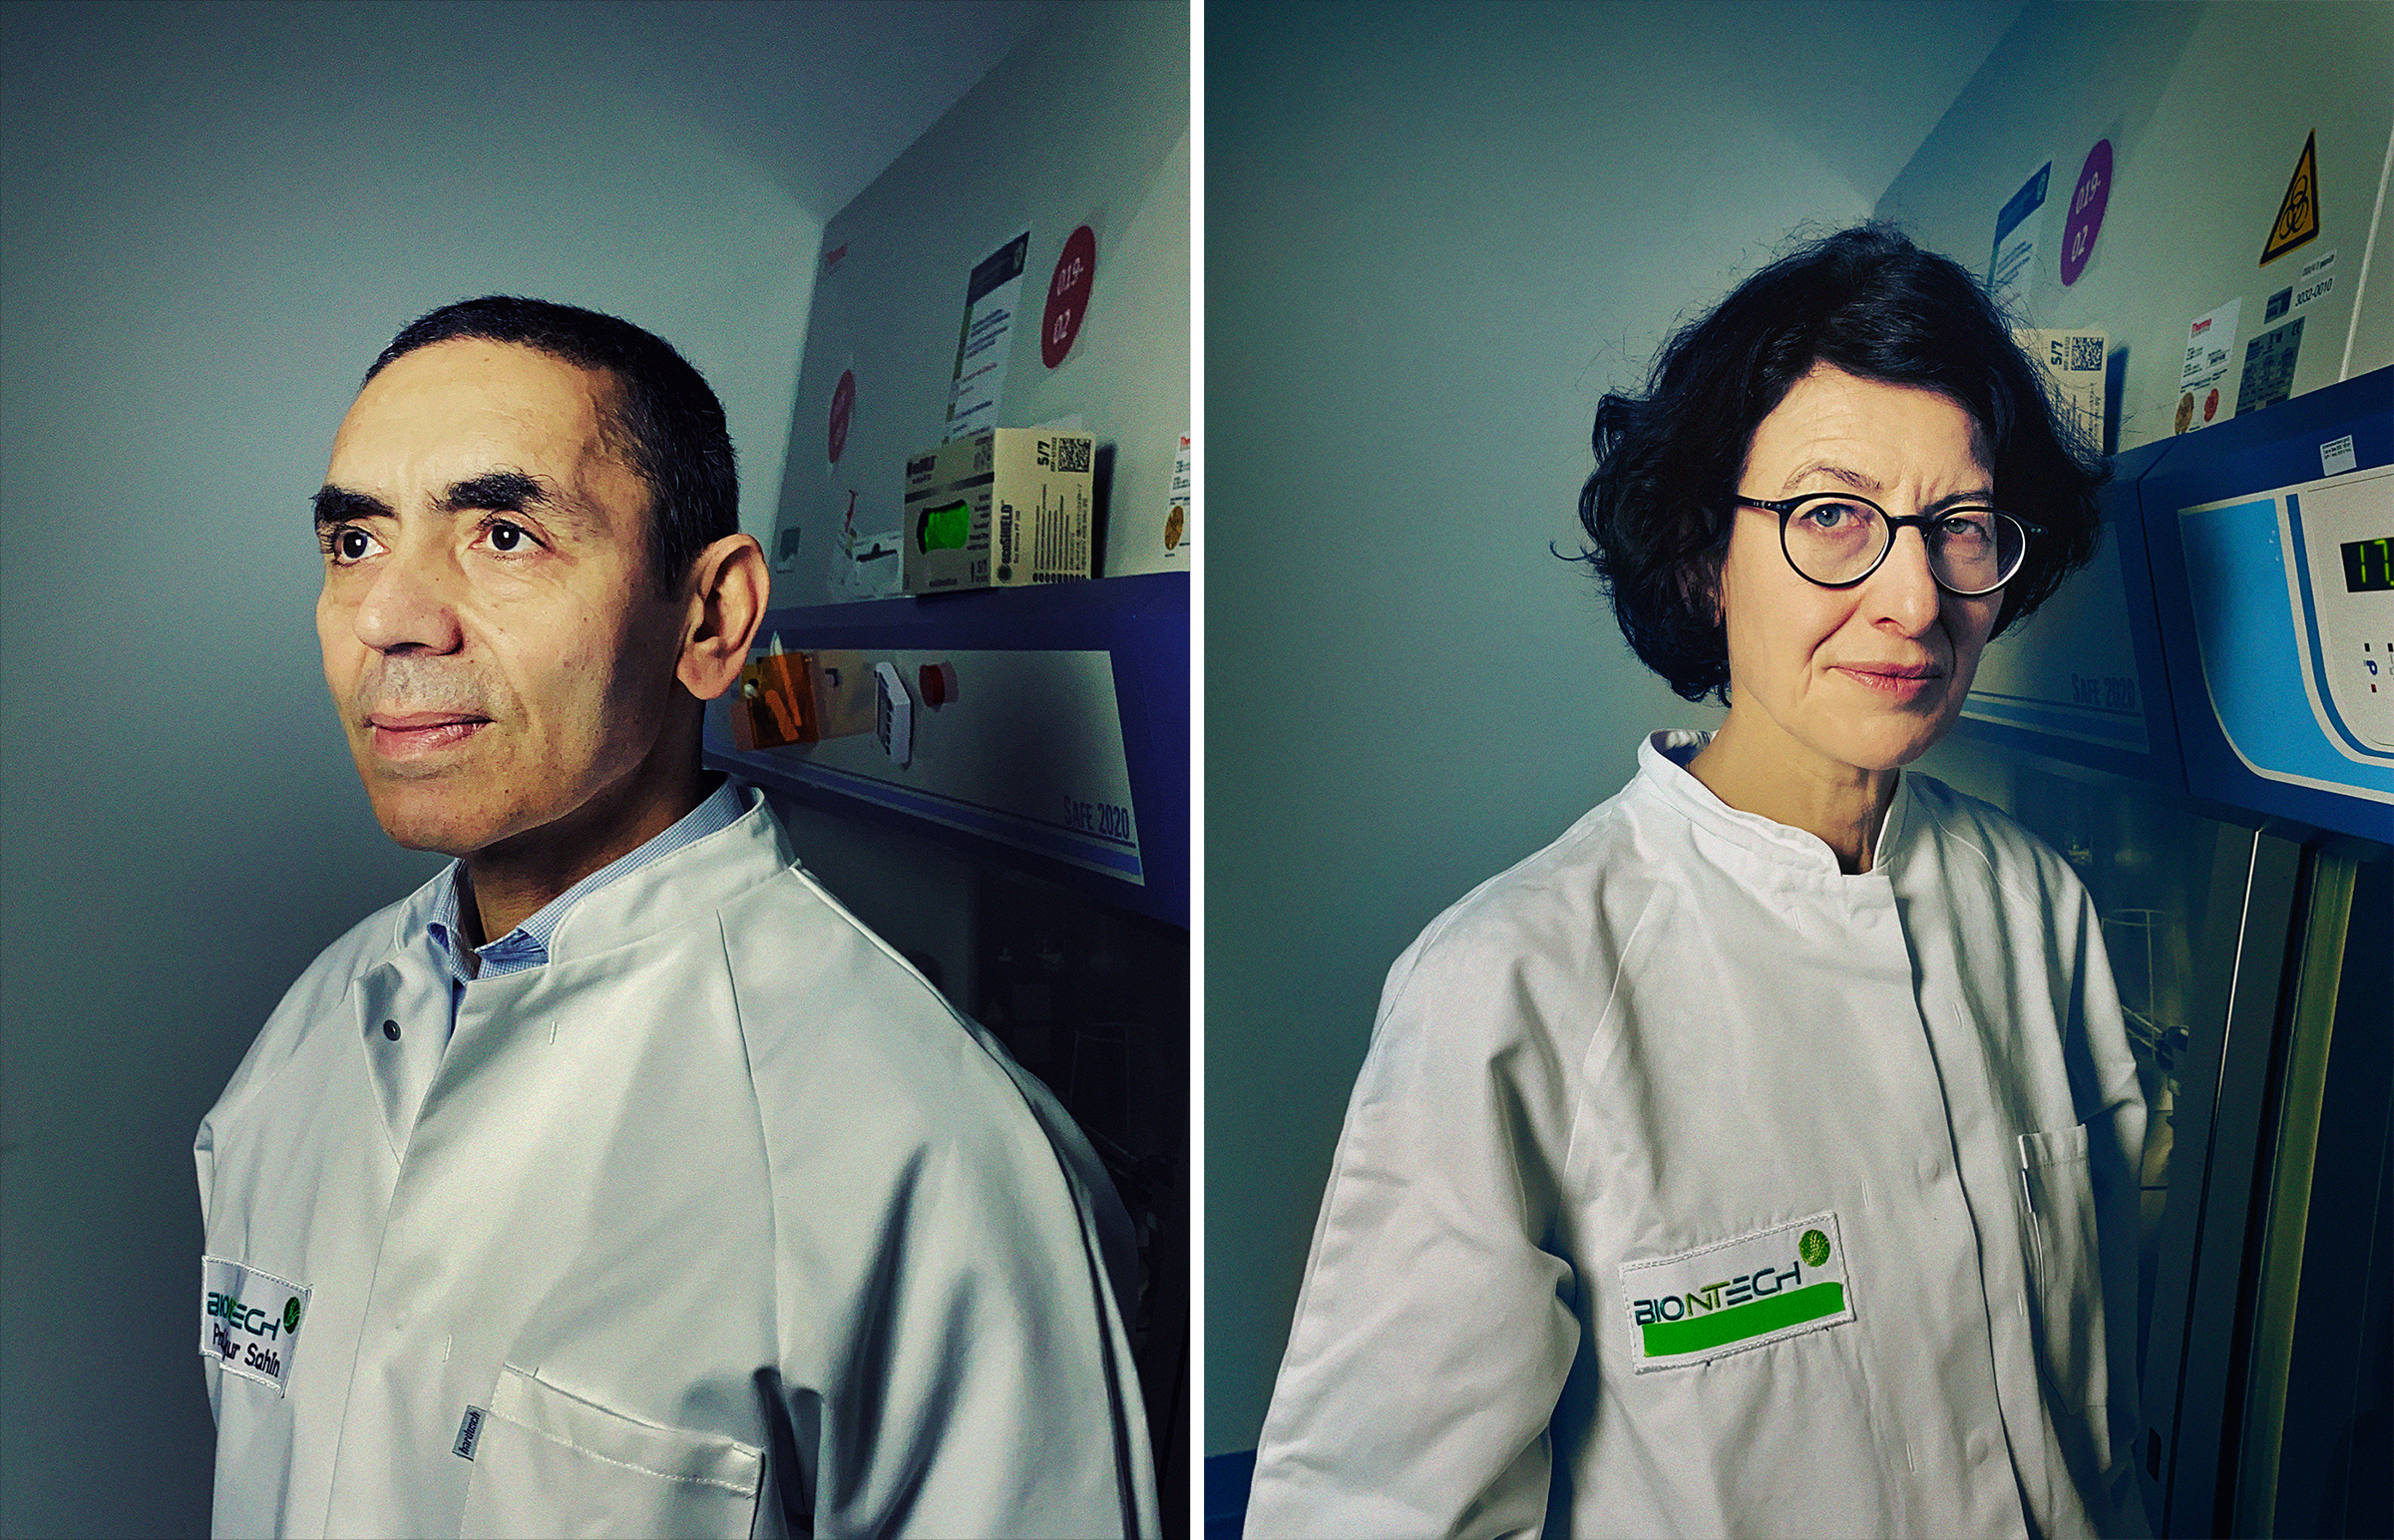 <strong> Drs. Ugur Sahin and Ozlem Tureci, Co-founders, BioNTech</strong>. In January 2020, before many in the Western world were paying attention to a new virus spreading in China, Dr. Ugur Sahin was convinced it would spur a pandemic. Sahin, who in 2008 co-founded the German biotech company BioNTech with his wife Dr. Ozlem Tureci, went to work on a vaccine and by March called his contact at Pfizer, a much larger pharmaceutical company with which BioNTech had previously worked on an influenza vaccine using mRNA. Less than a year later, the Pfizer-BioNTech COVID-19 vaccine became the first ever mRNA vaccine available for widespread use. Even so, Sahin, BioNTech’s CEO, and Tureci, its chief medical officer, maintain that BioNTech is not an mRNA company but rather an immunotherapy company. Much of the couple’s work—both at BioNTech and at their previous venture, Ganymed—has focused on treating cancer. But it is mRNA, and the COVID-19 vaccine made possible by the technology, that has pushed the famously hardworking couple into the ­limelight—and helped them become one of the richest pairs in Germany, though they reportedly still bicycle to work and live in a modest apartment near their office. (Dina Litovsky—Redux for TIME)